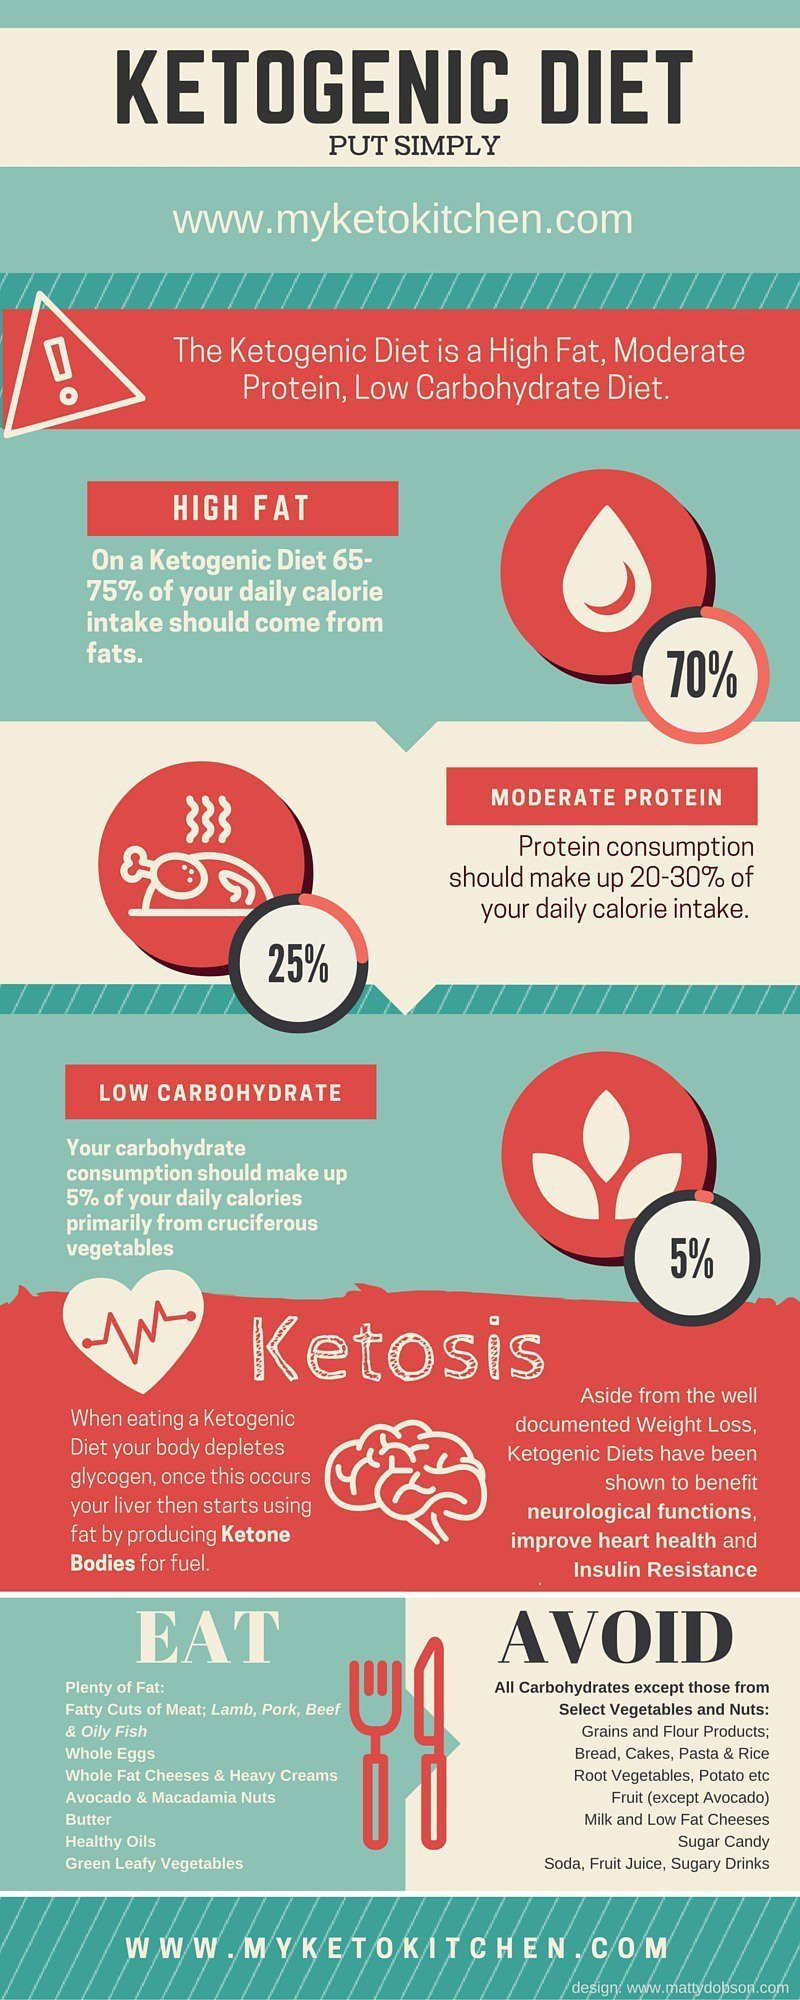 Keto Diet Unhealthy
 How Much Protein A Keto Diet Is Too Much Bad for Ketosis